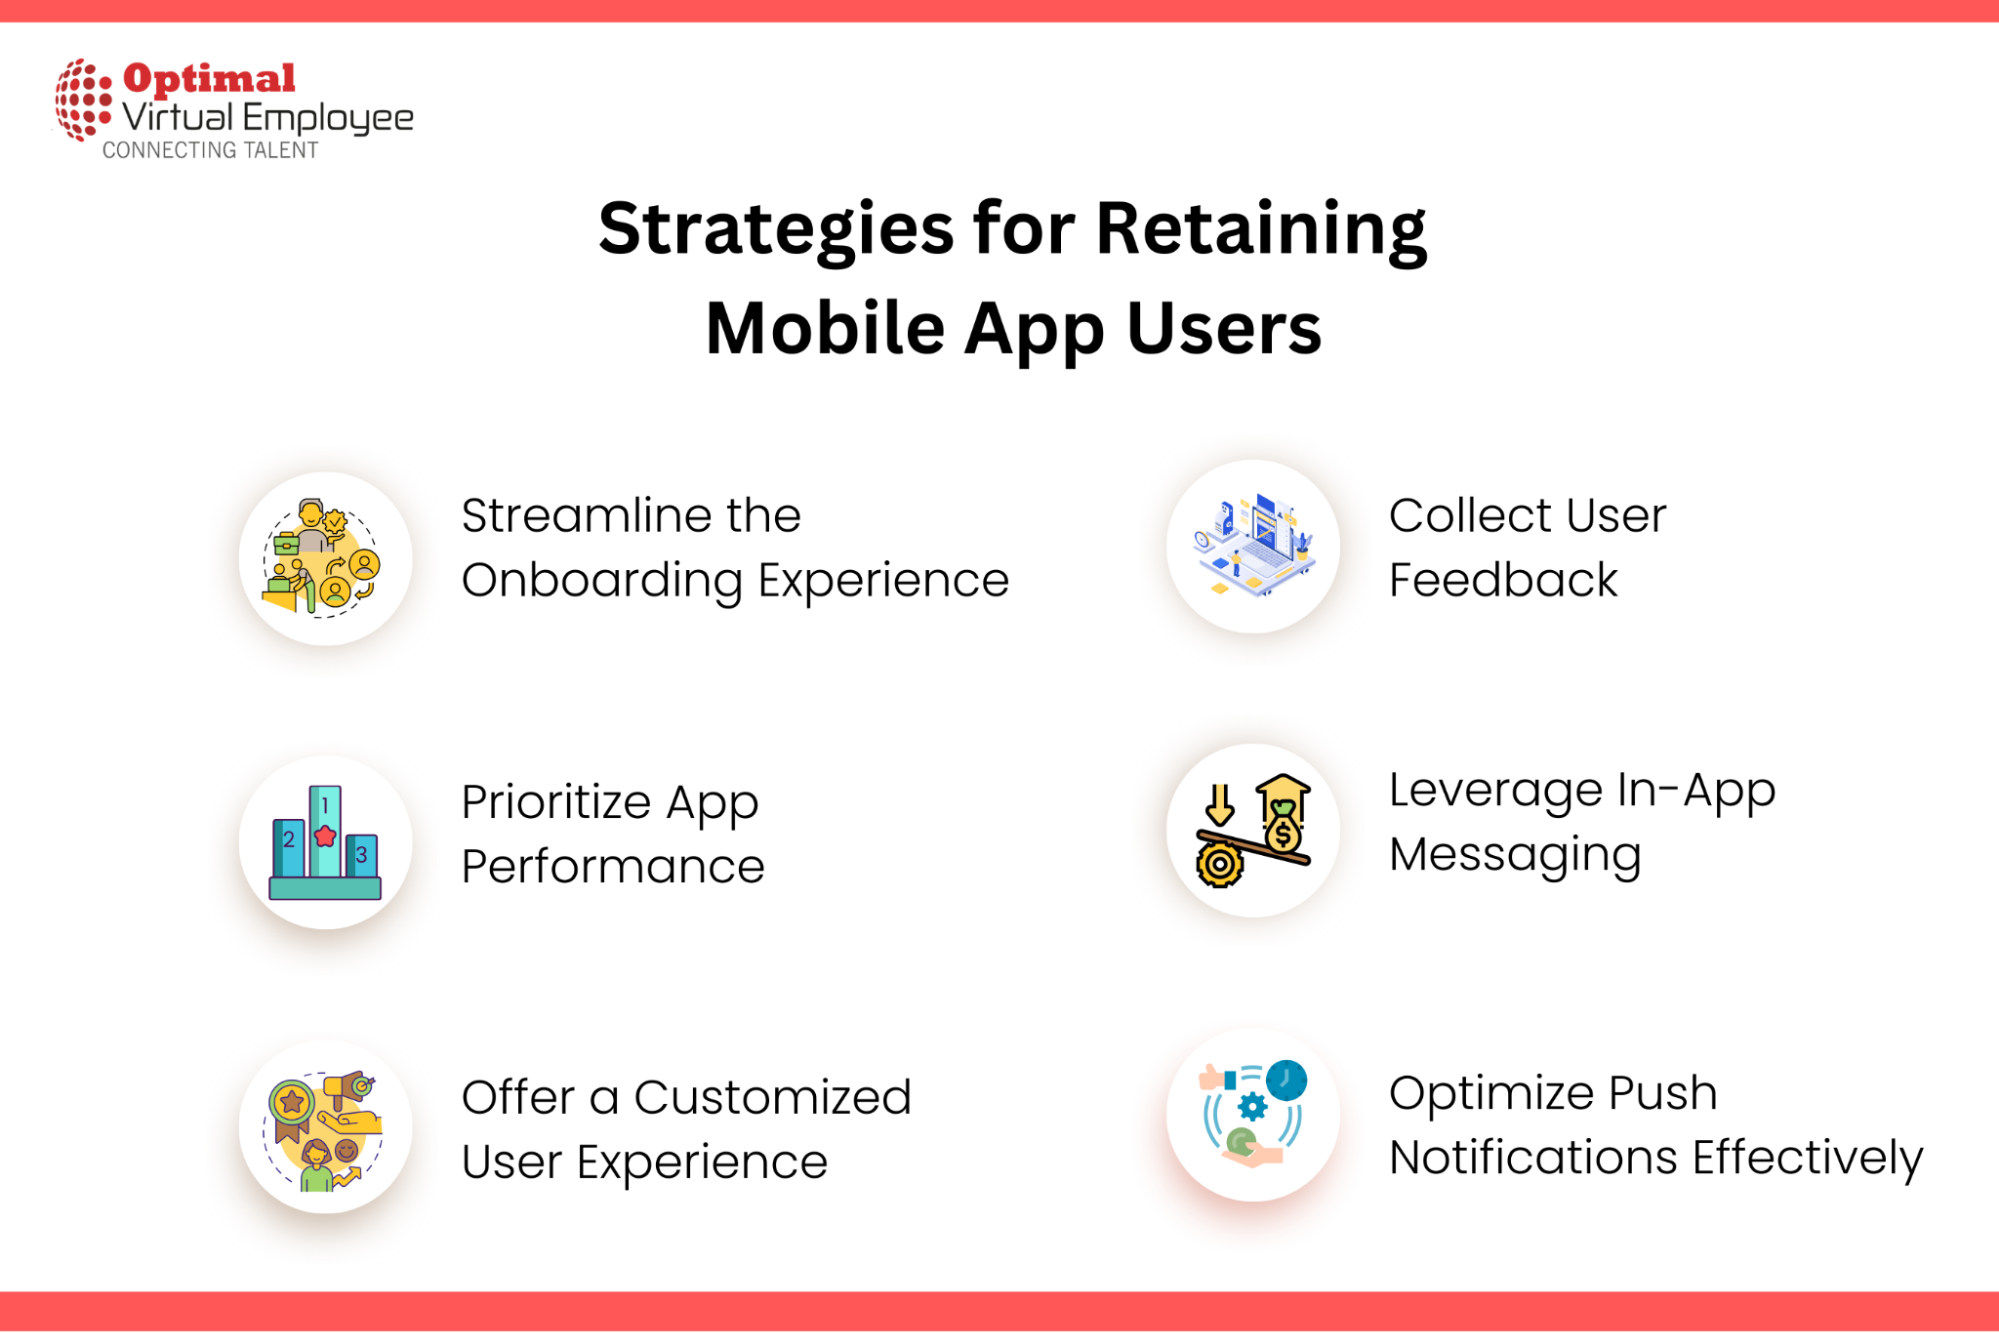 Strategies for Retaining Mobile App Users